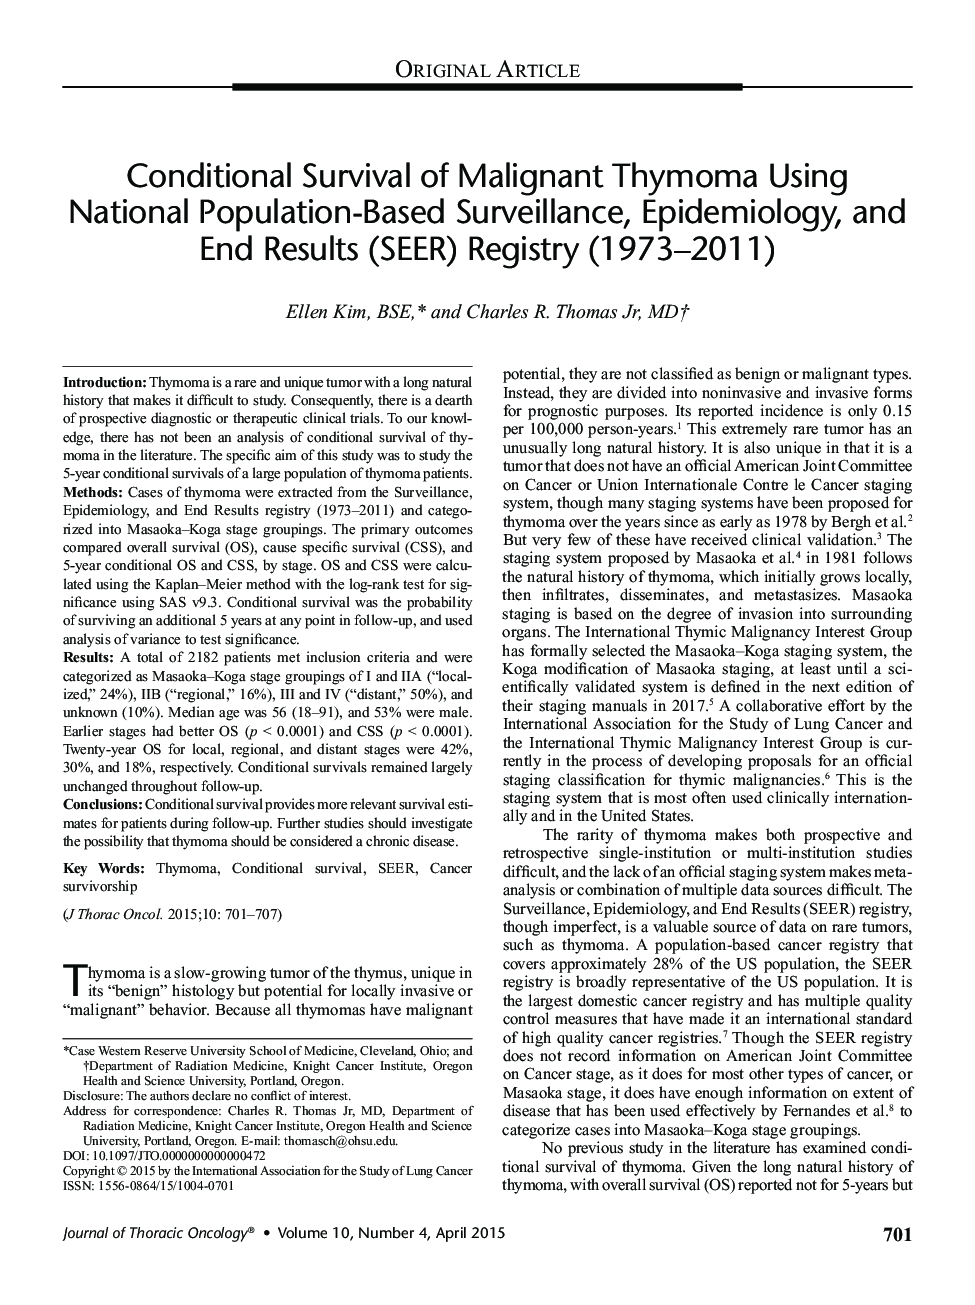 Conditional Survival of Malignant Thymoma Using National Population-Based Surveillance, Epidemiology, and End Results (SEER) Registry (1973-2011)